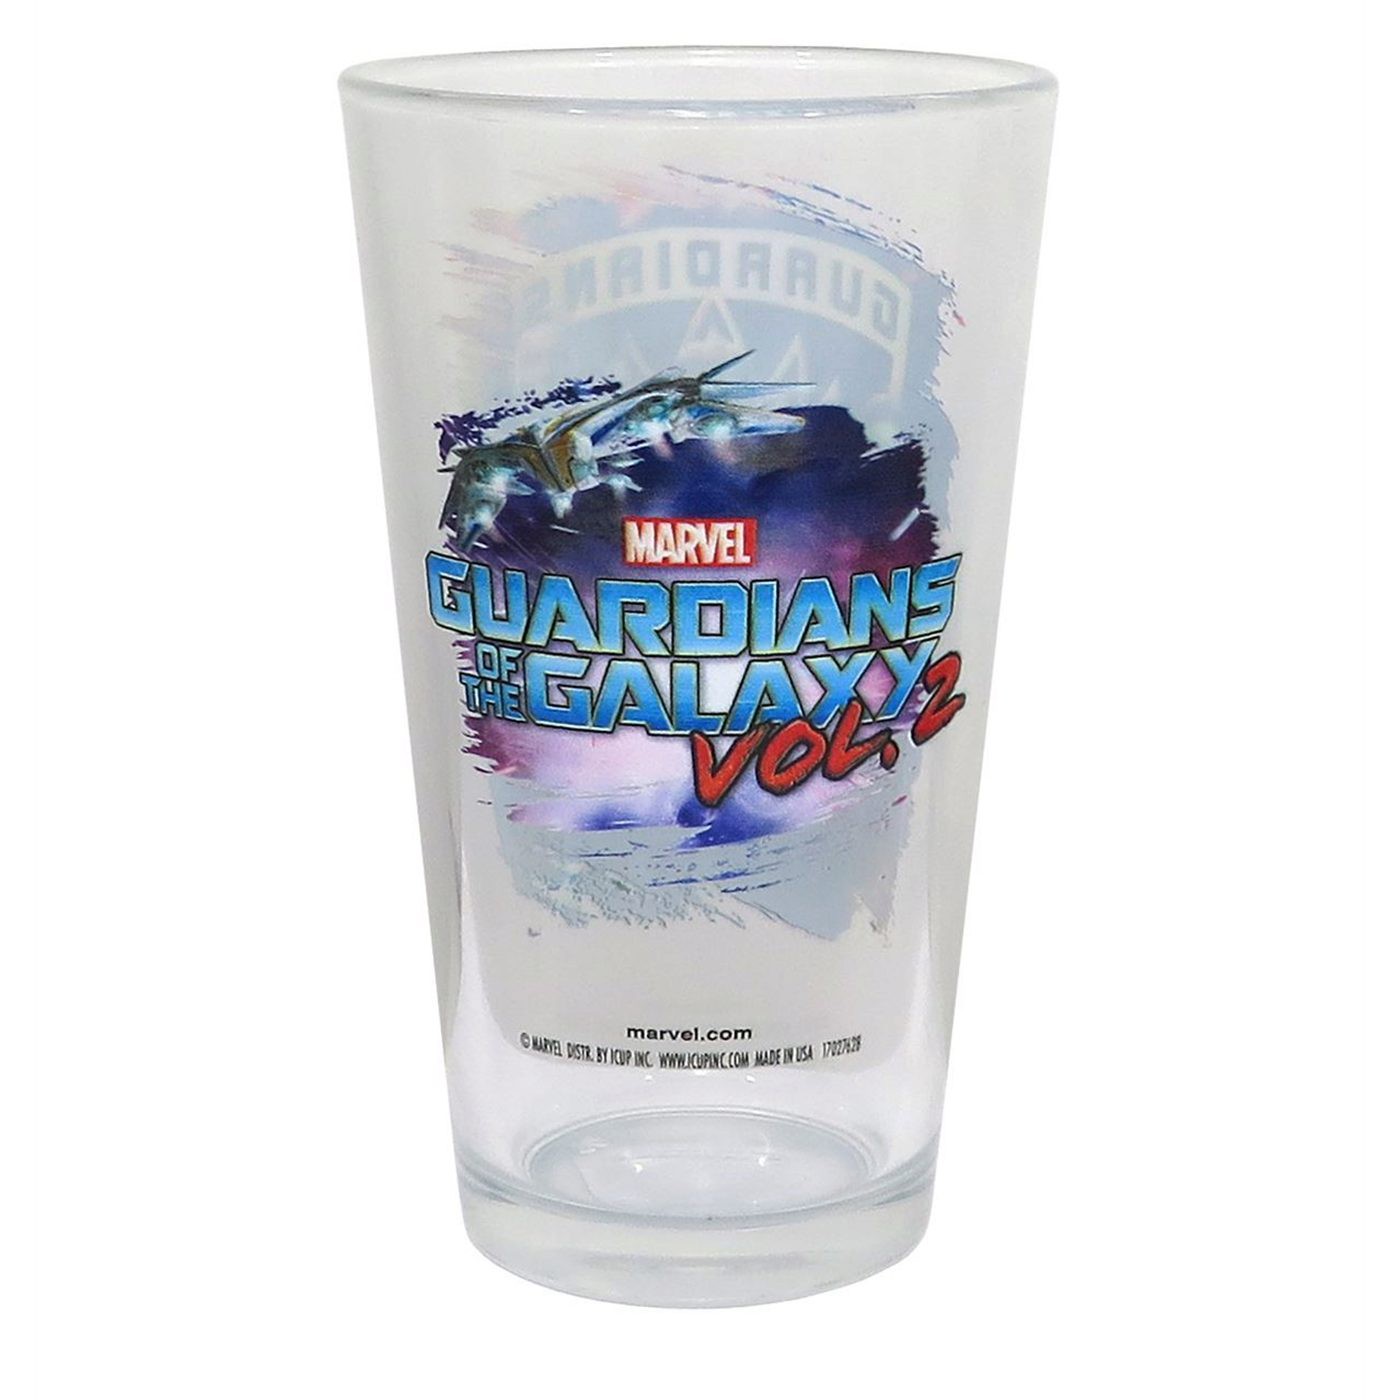 Guardians of the Galaxy Vol. 2 Movie Pint Glass 